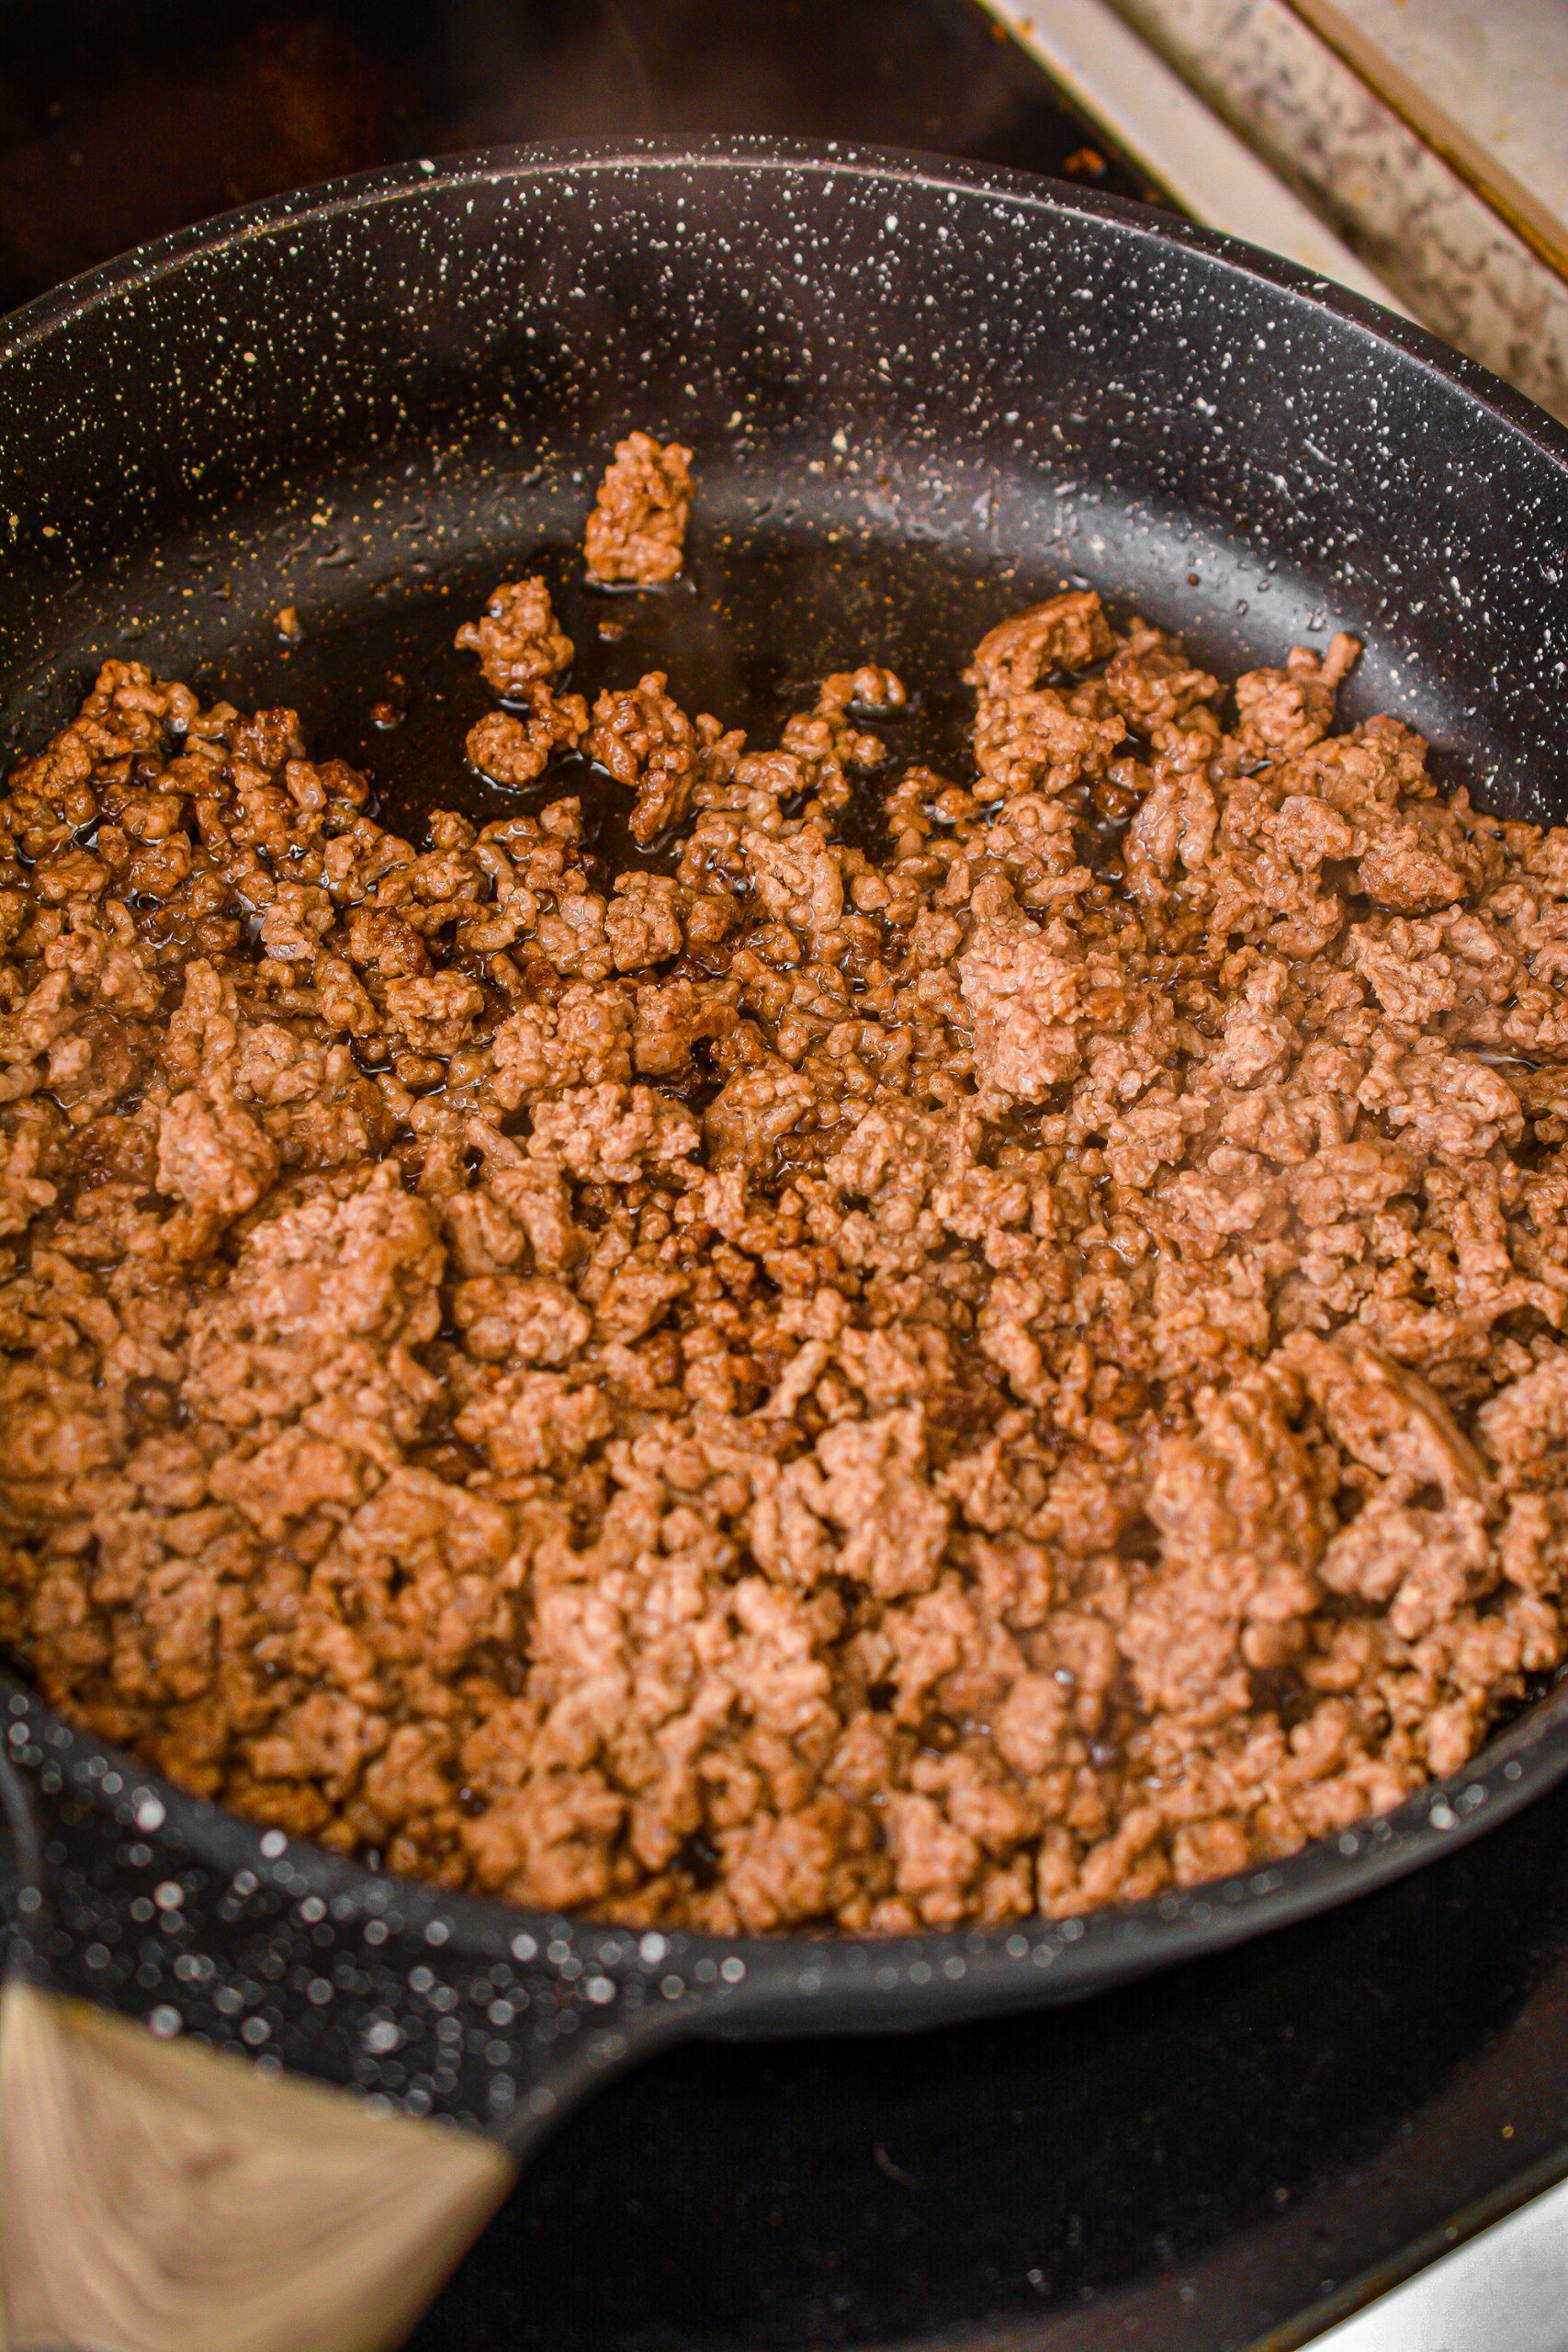 Heat the ground beef in a skillet over medium-high heat until browned completely through.